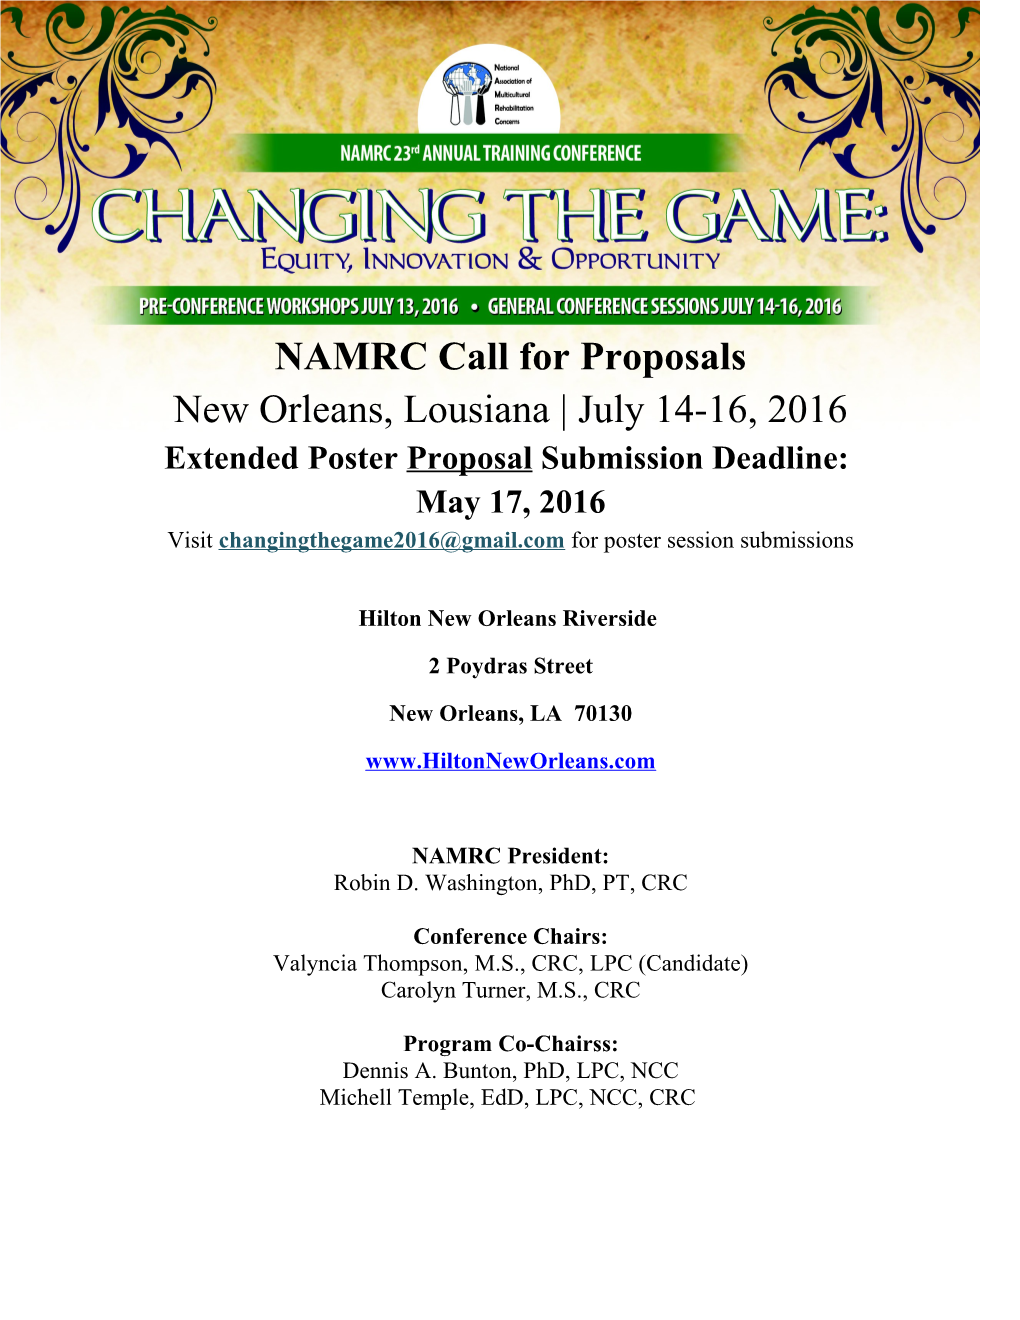 NAMRC Call for Proposals